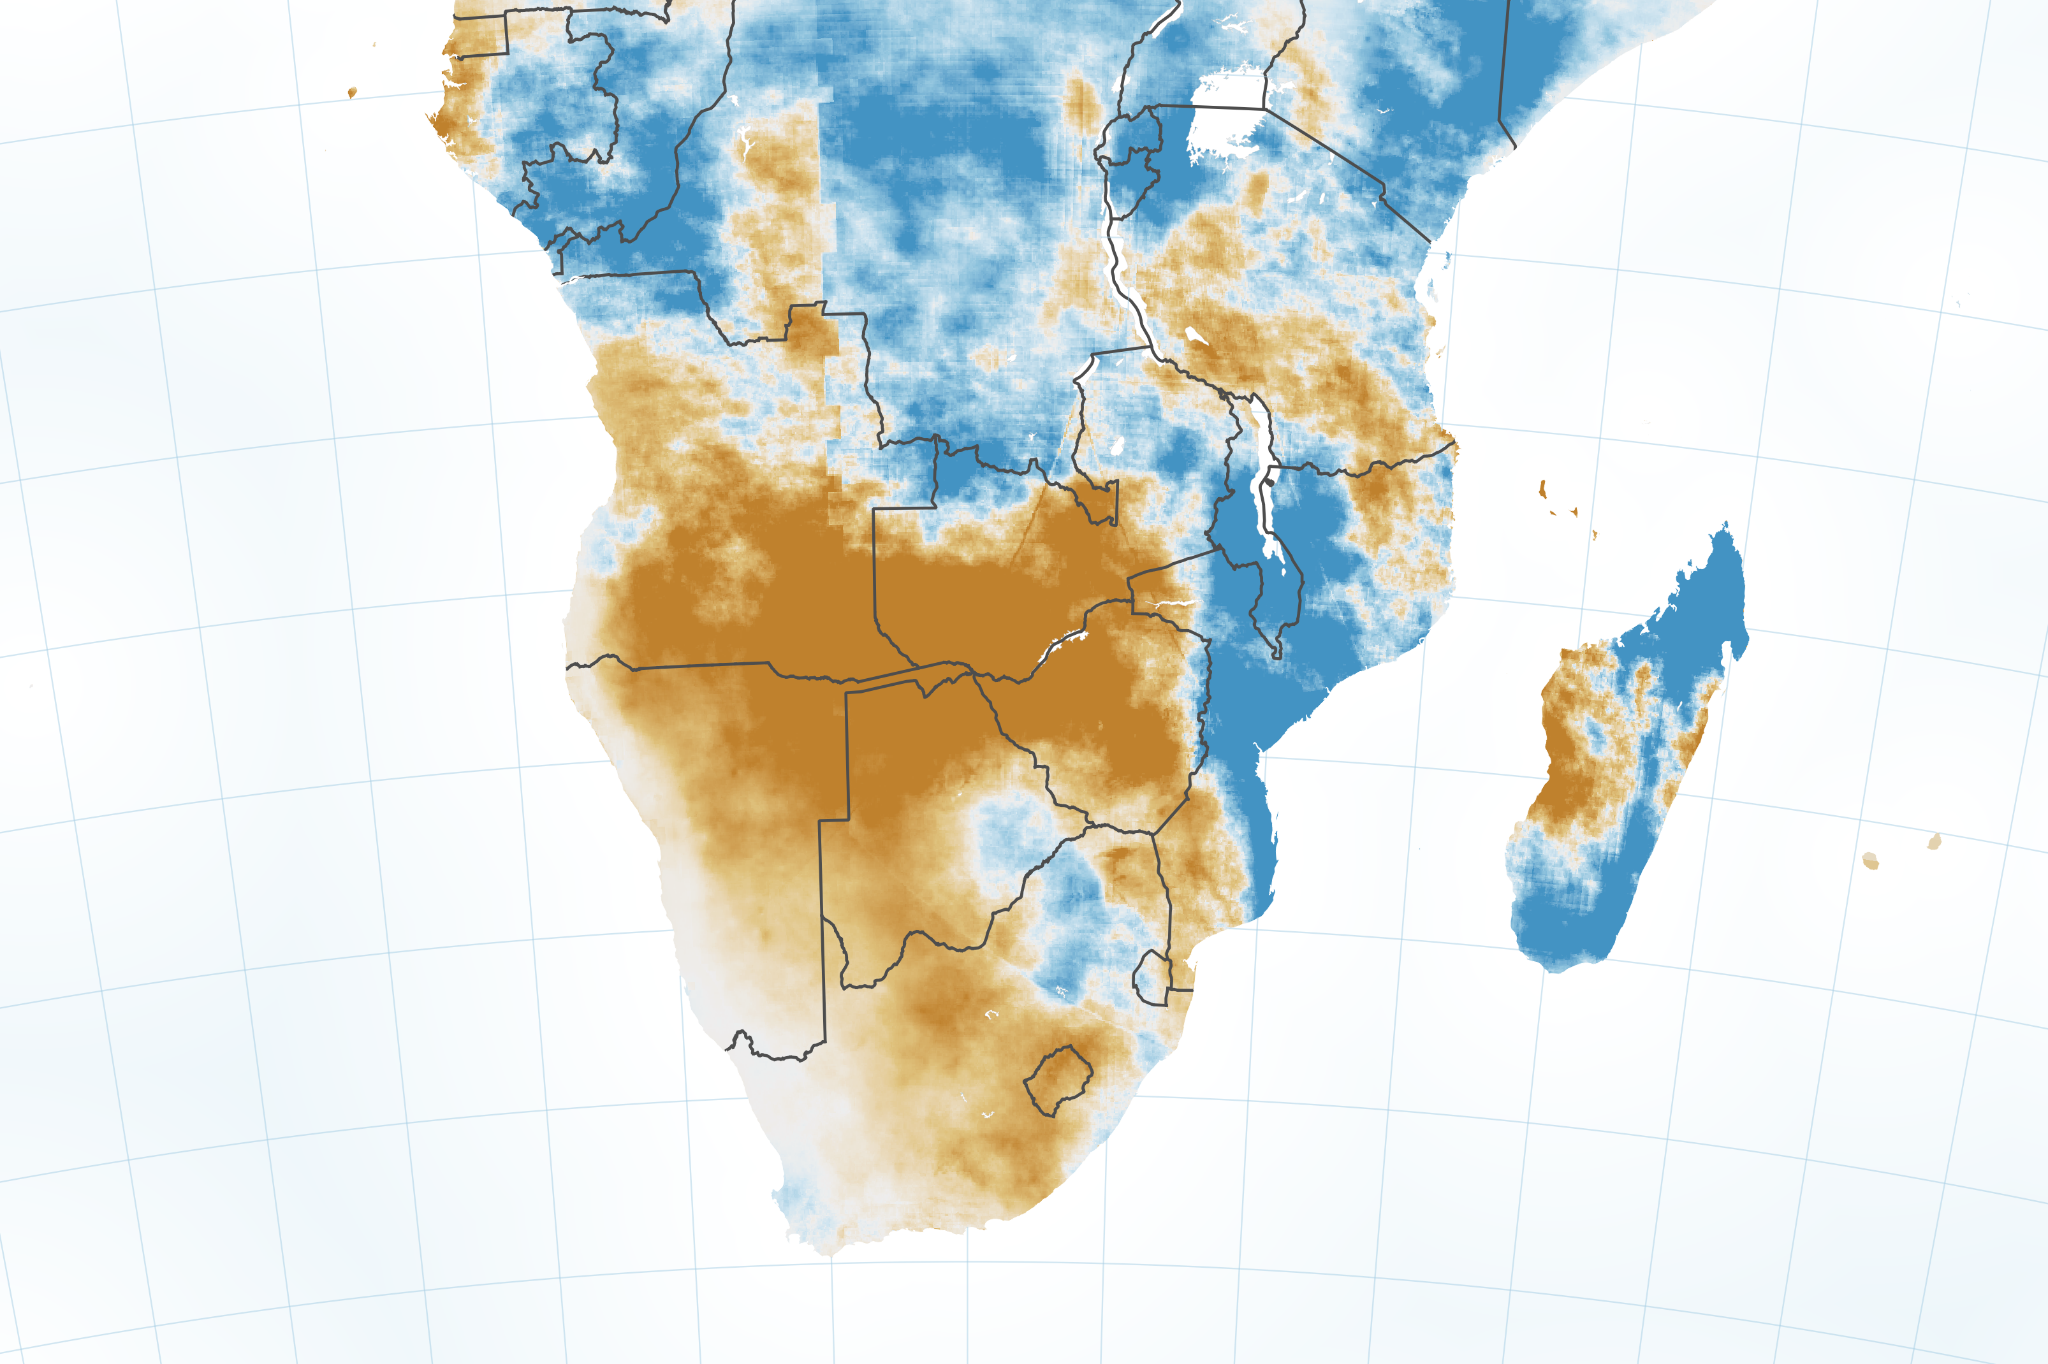 Drought Harms Corn Crops in Southern Africa - related image preview